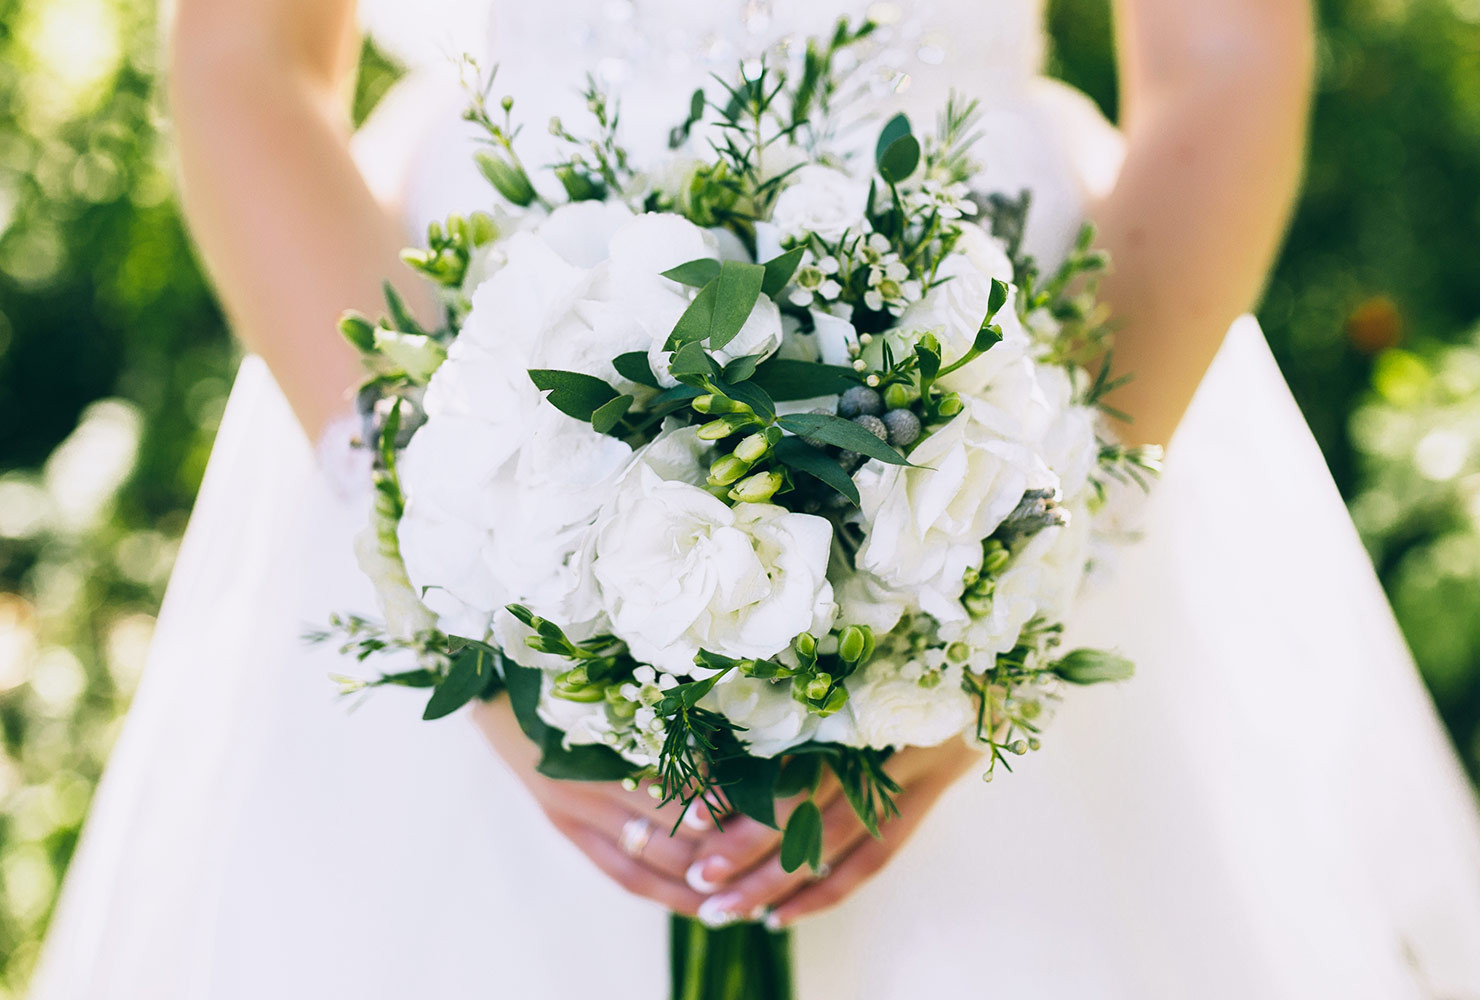 Best Flowers For Wedding
 The 15 Most Popular Wedding Flowers In 2019